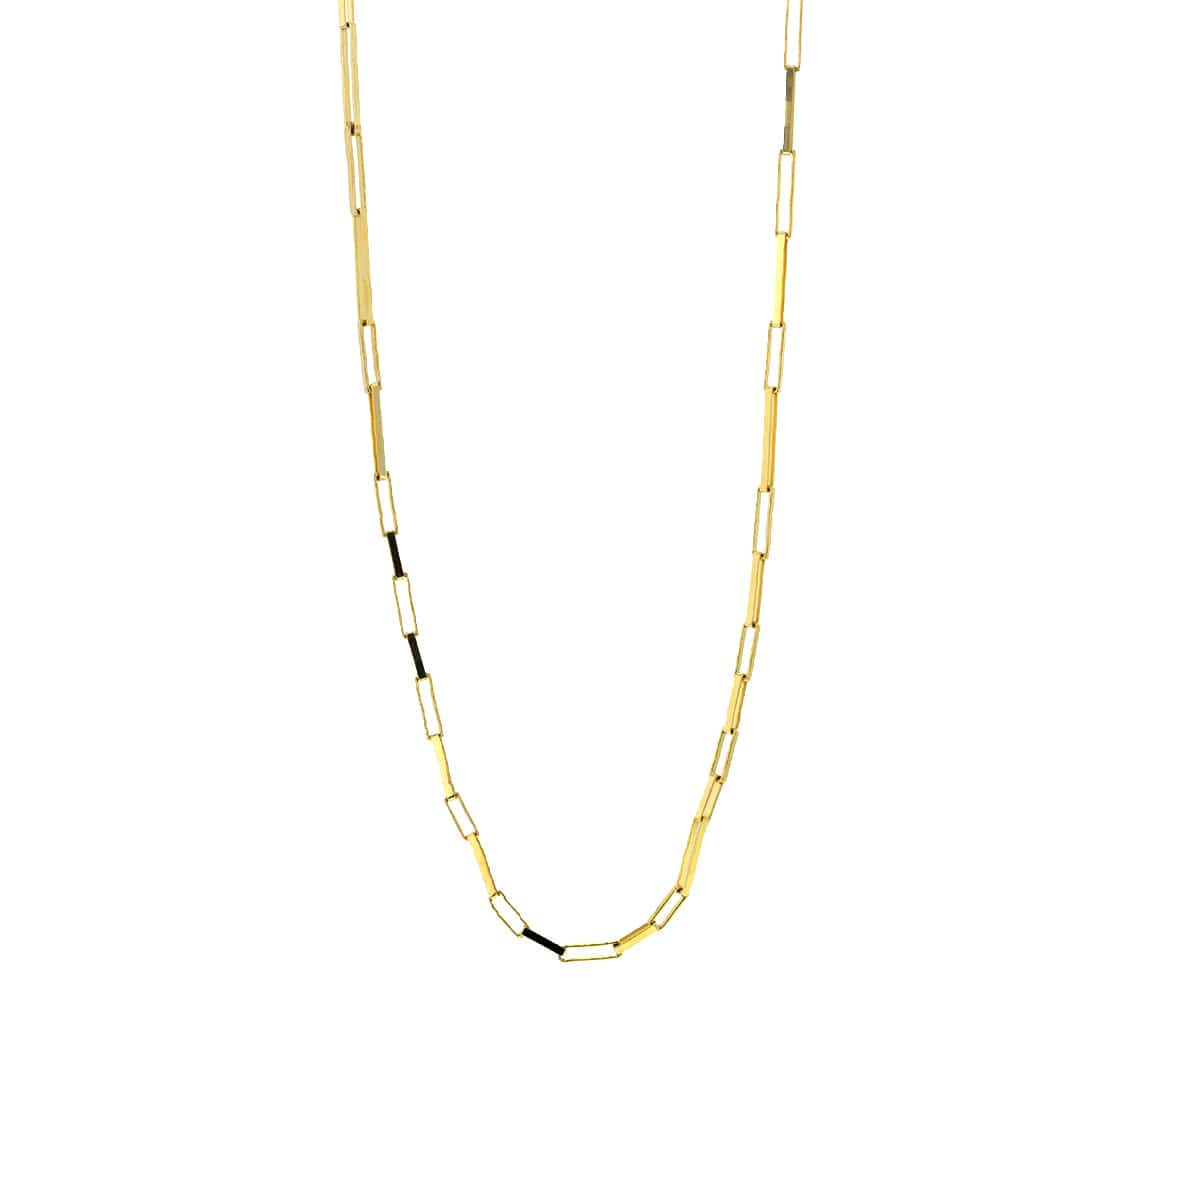 Capri Chain Square link light weight gold chain 22" 14KY